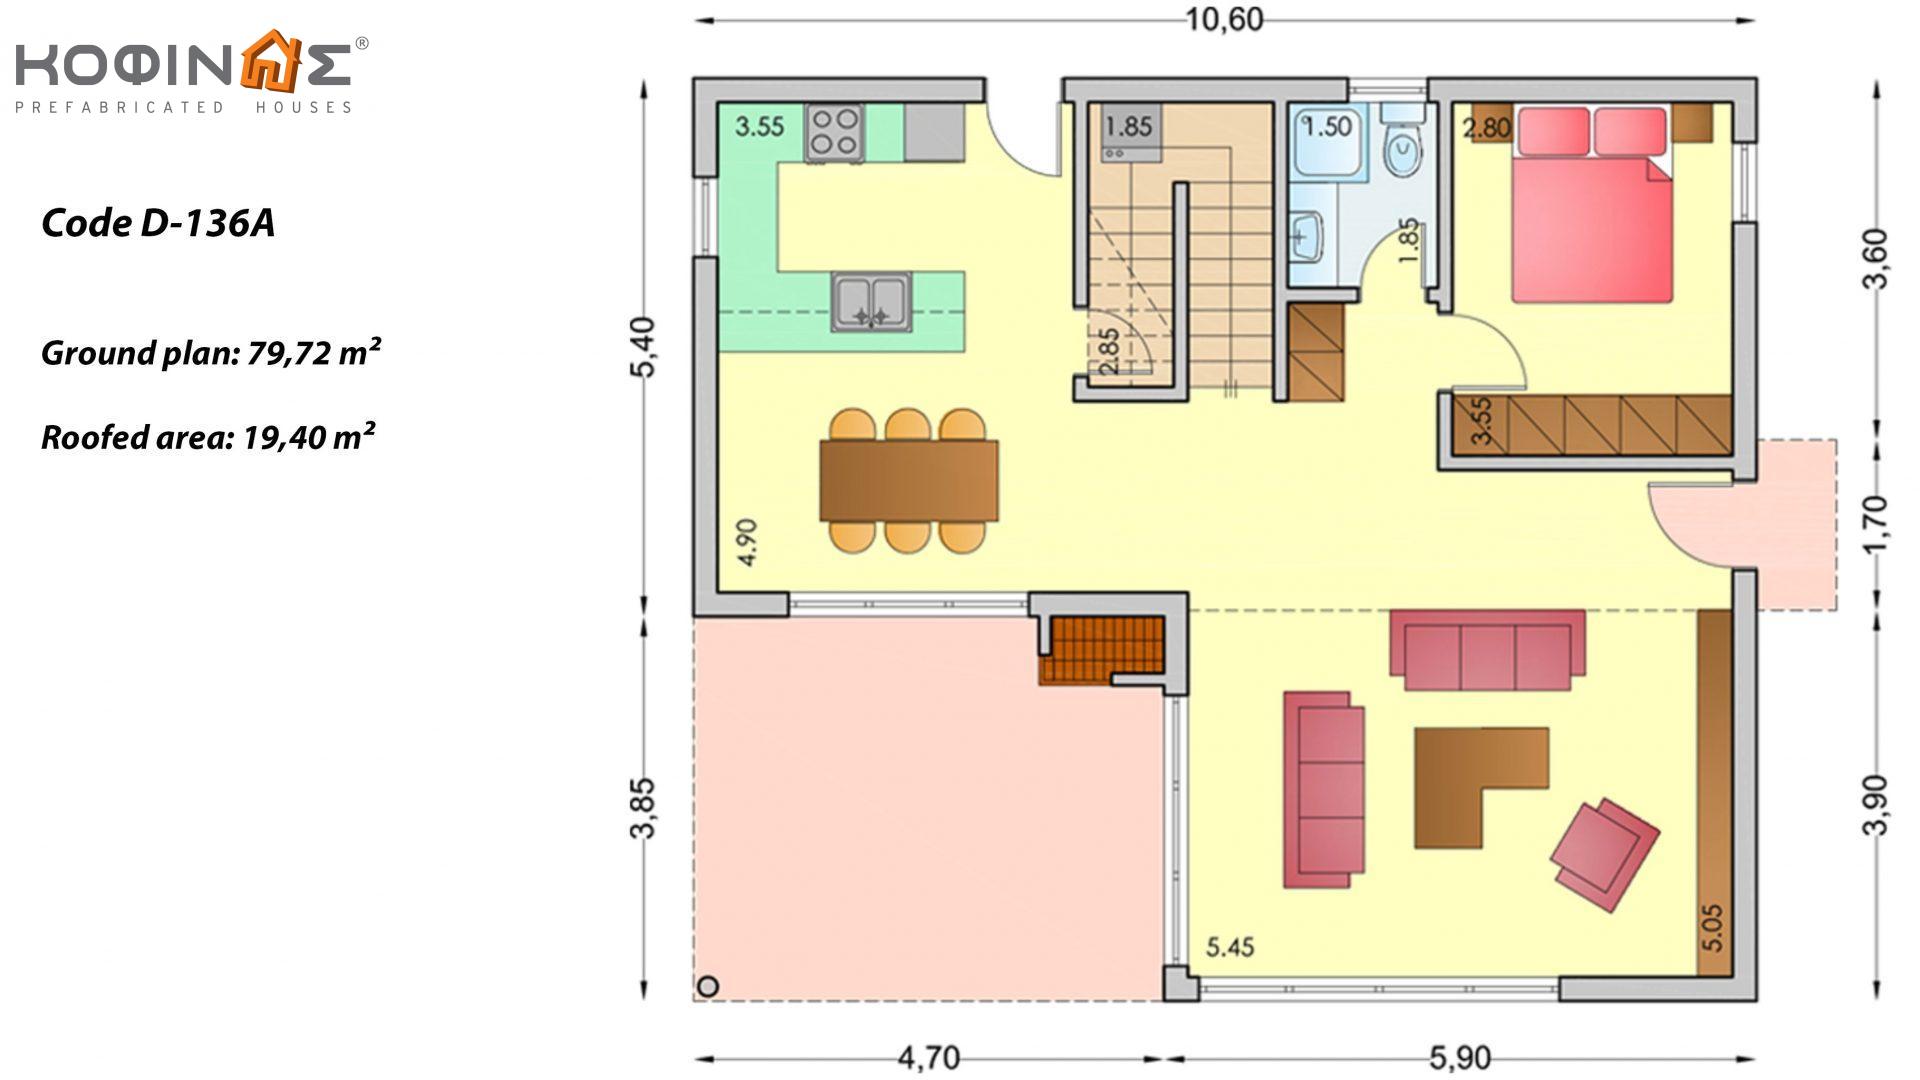 2-story house D-136a, total surface of 136,72 m²,covered roofed areas 19.40 m²